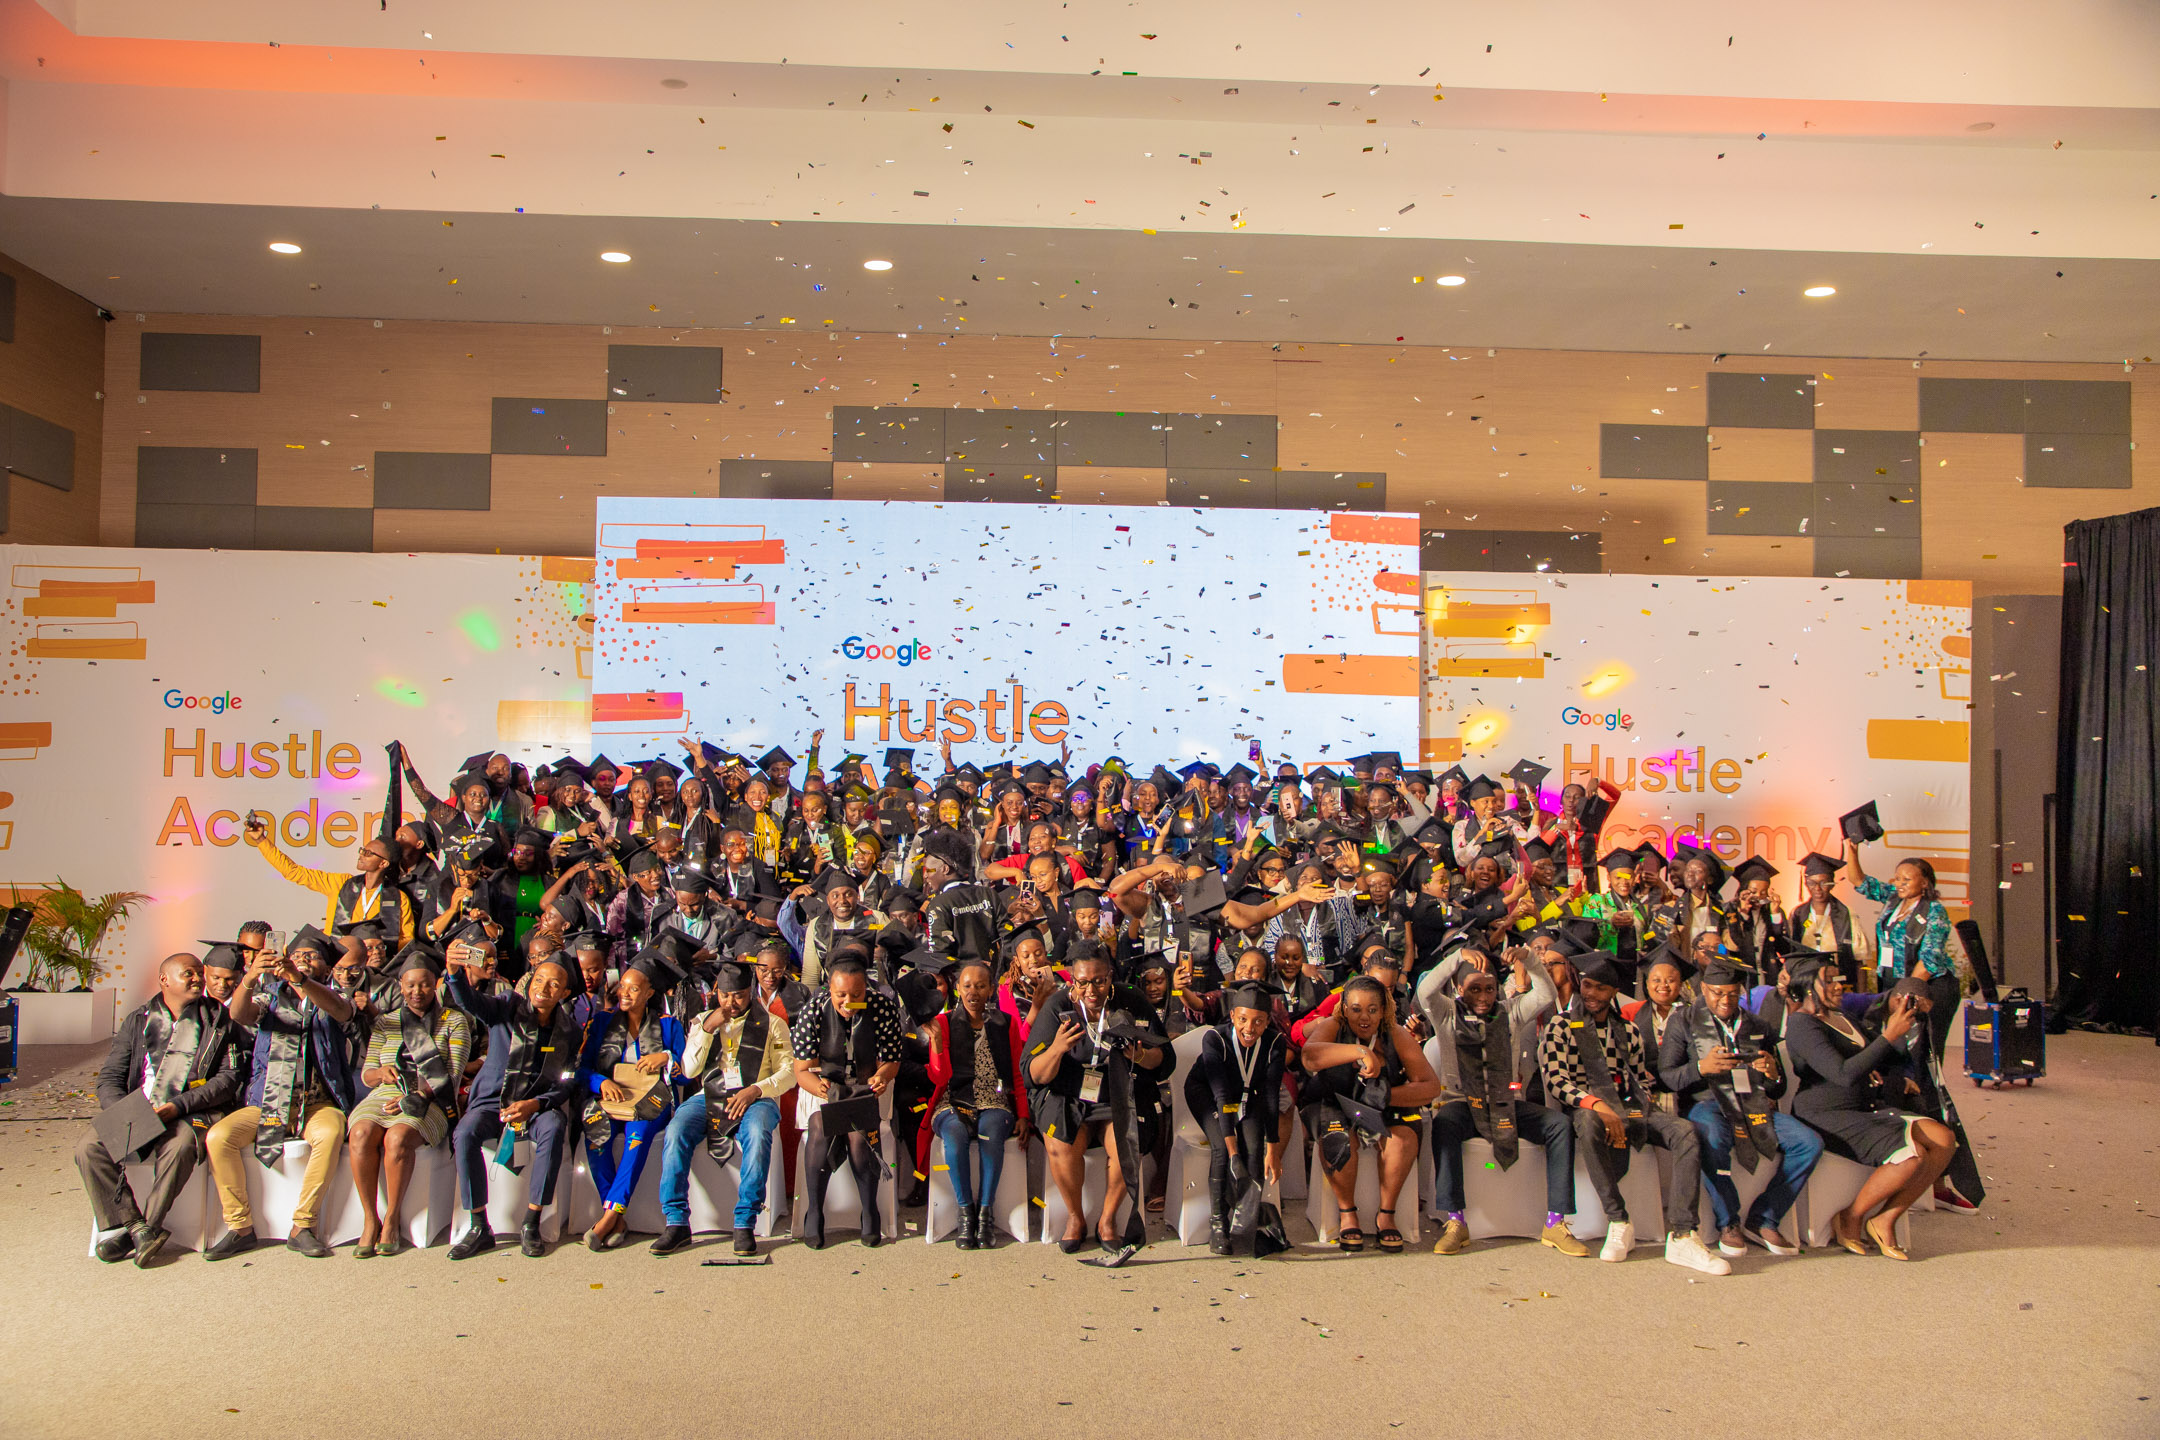 5,300 SMEs Graduate from Google’s Hustle Academy